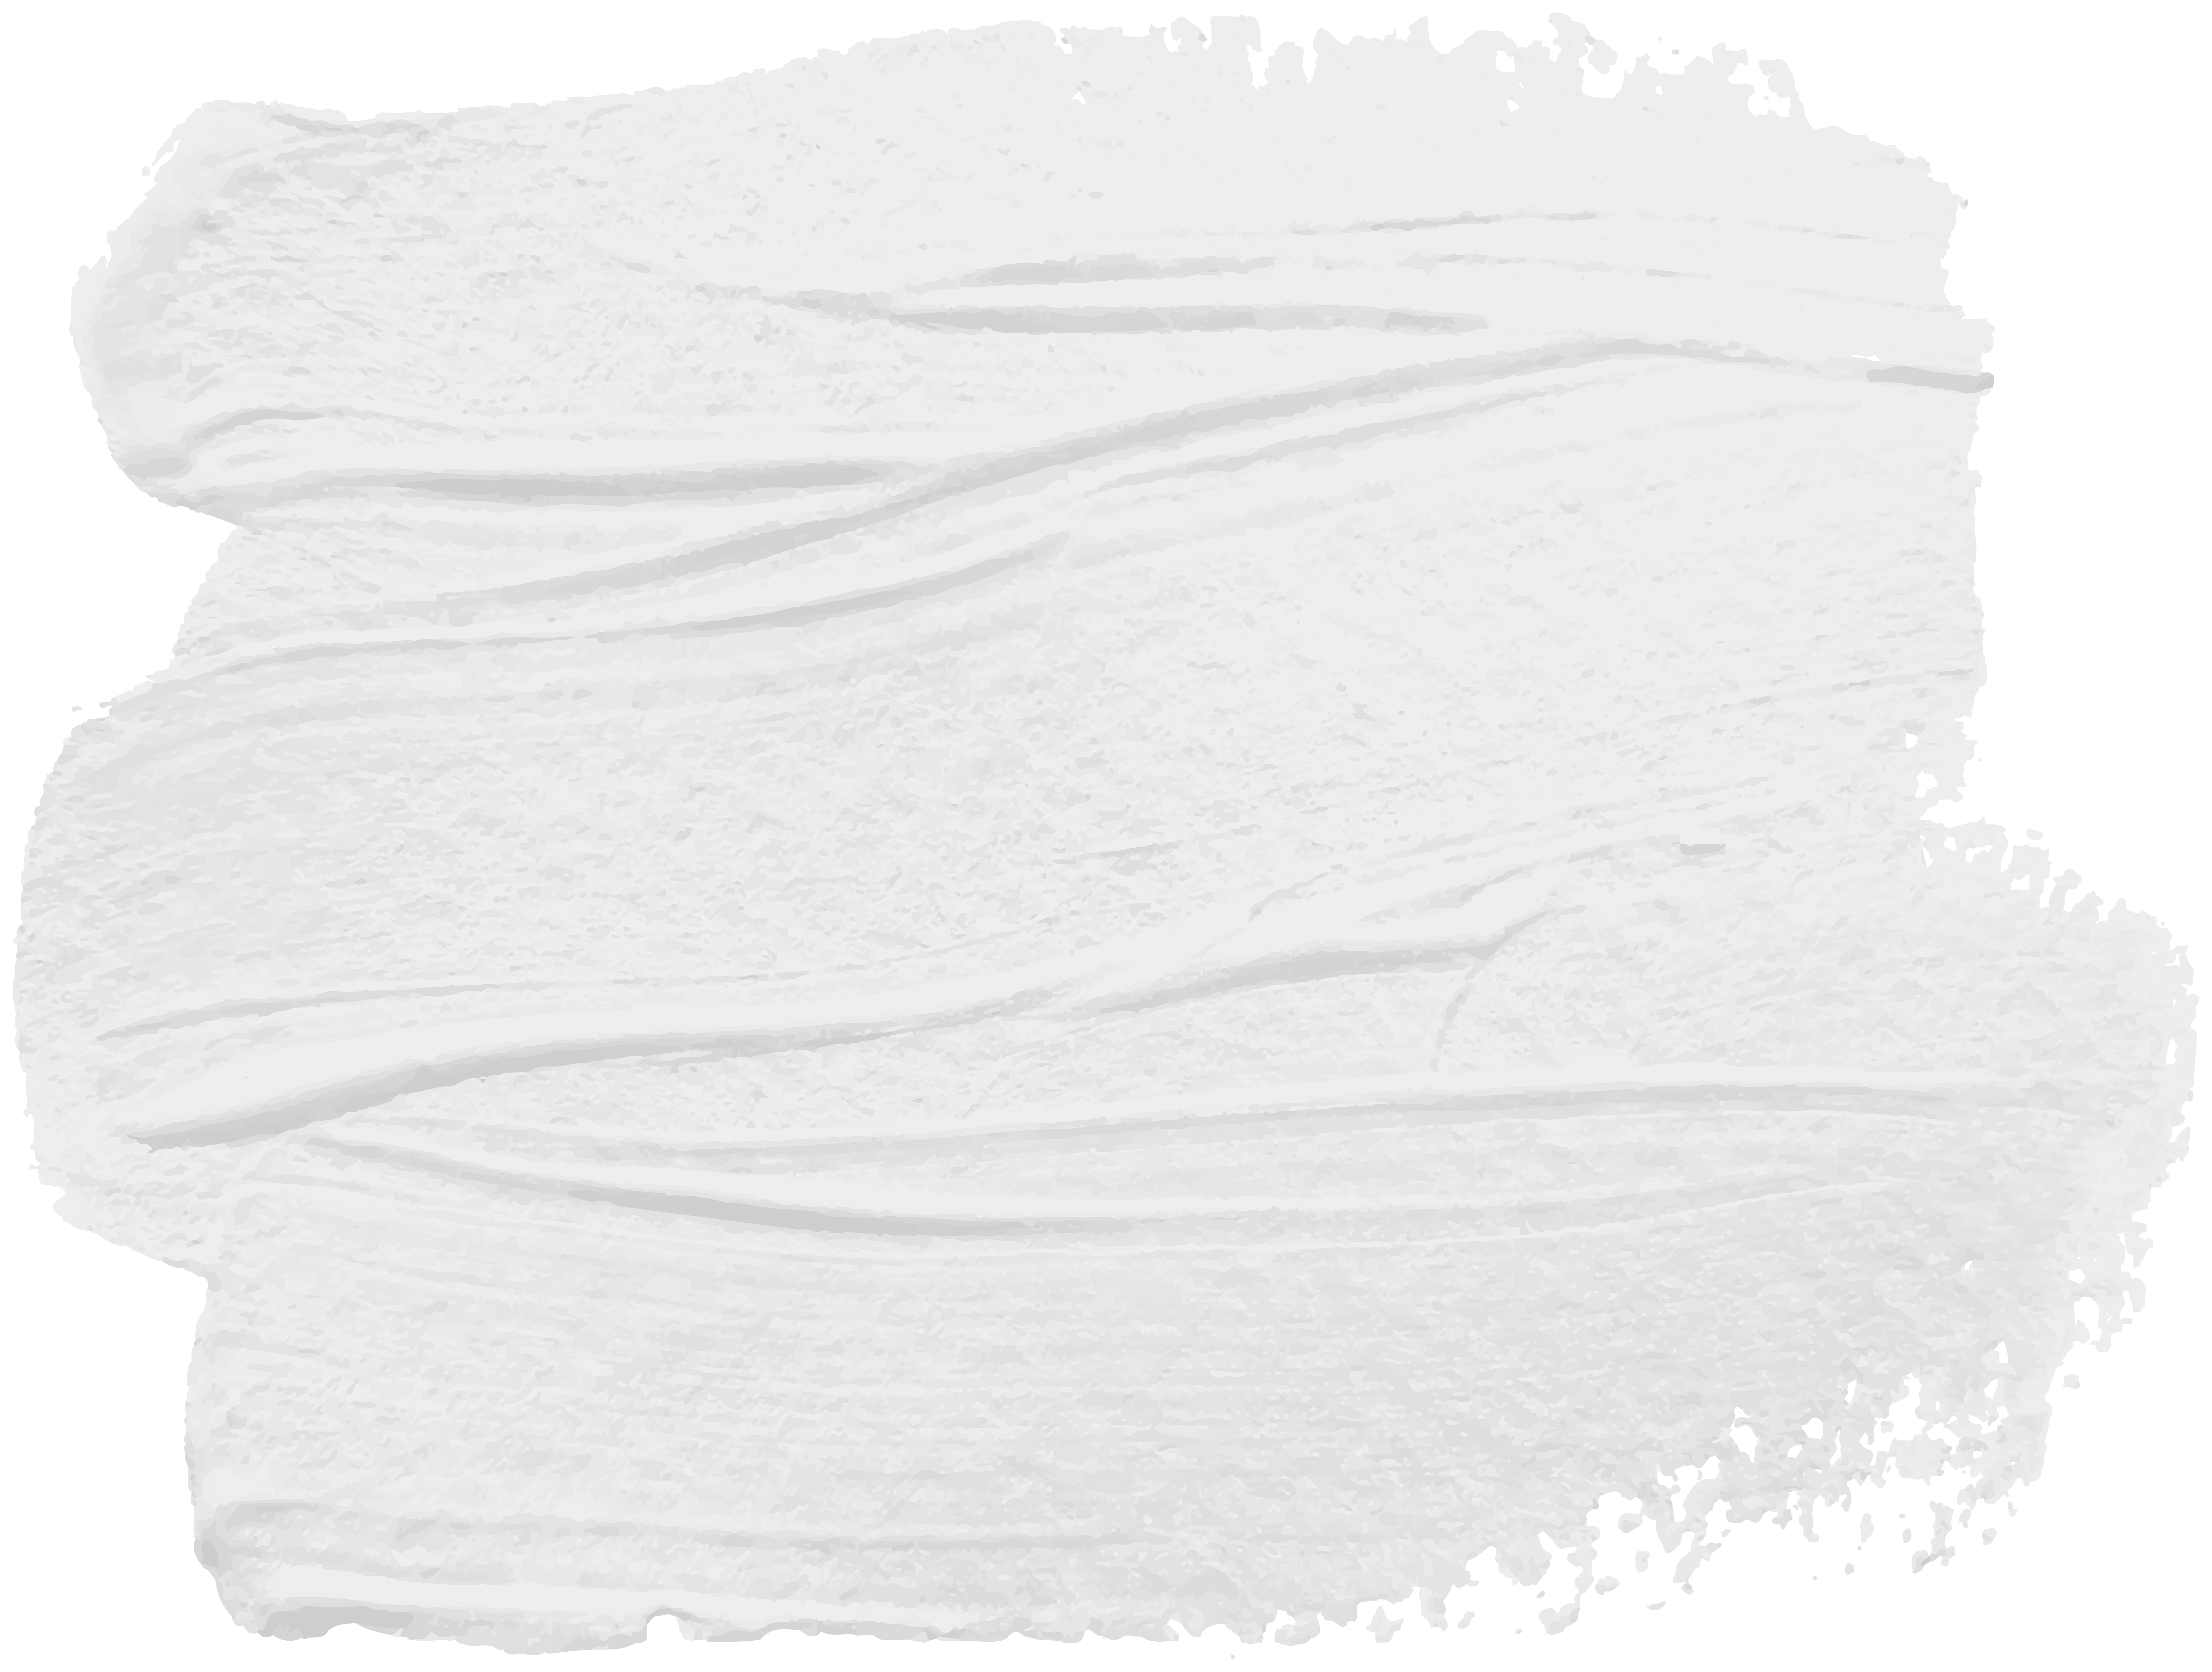 Paint Stain On White Stock Illustration - Download Image Now